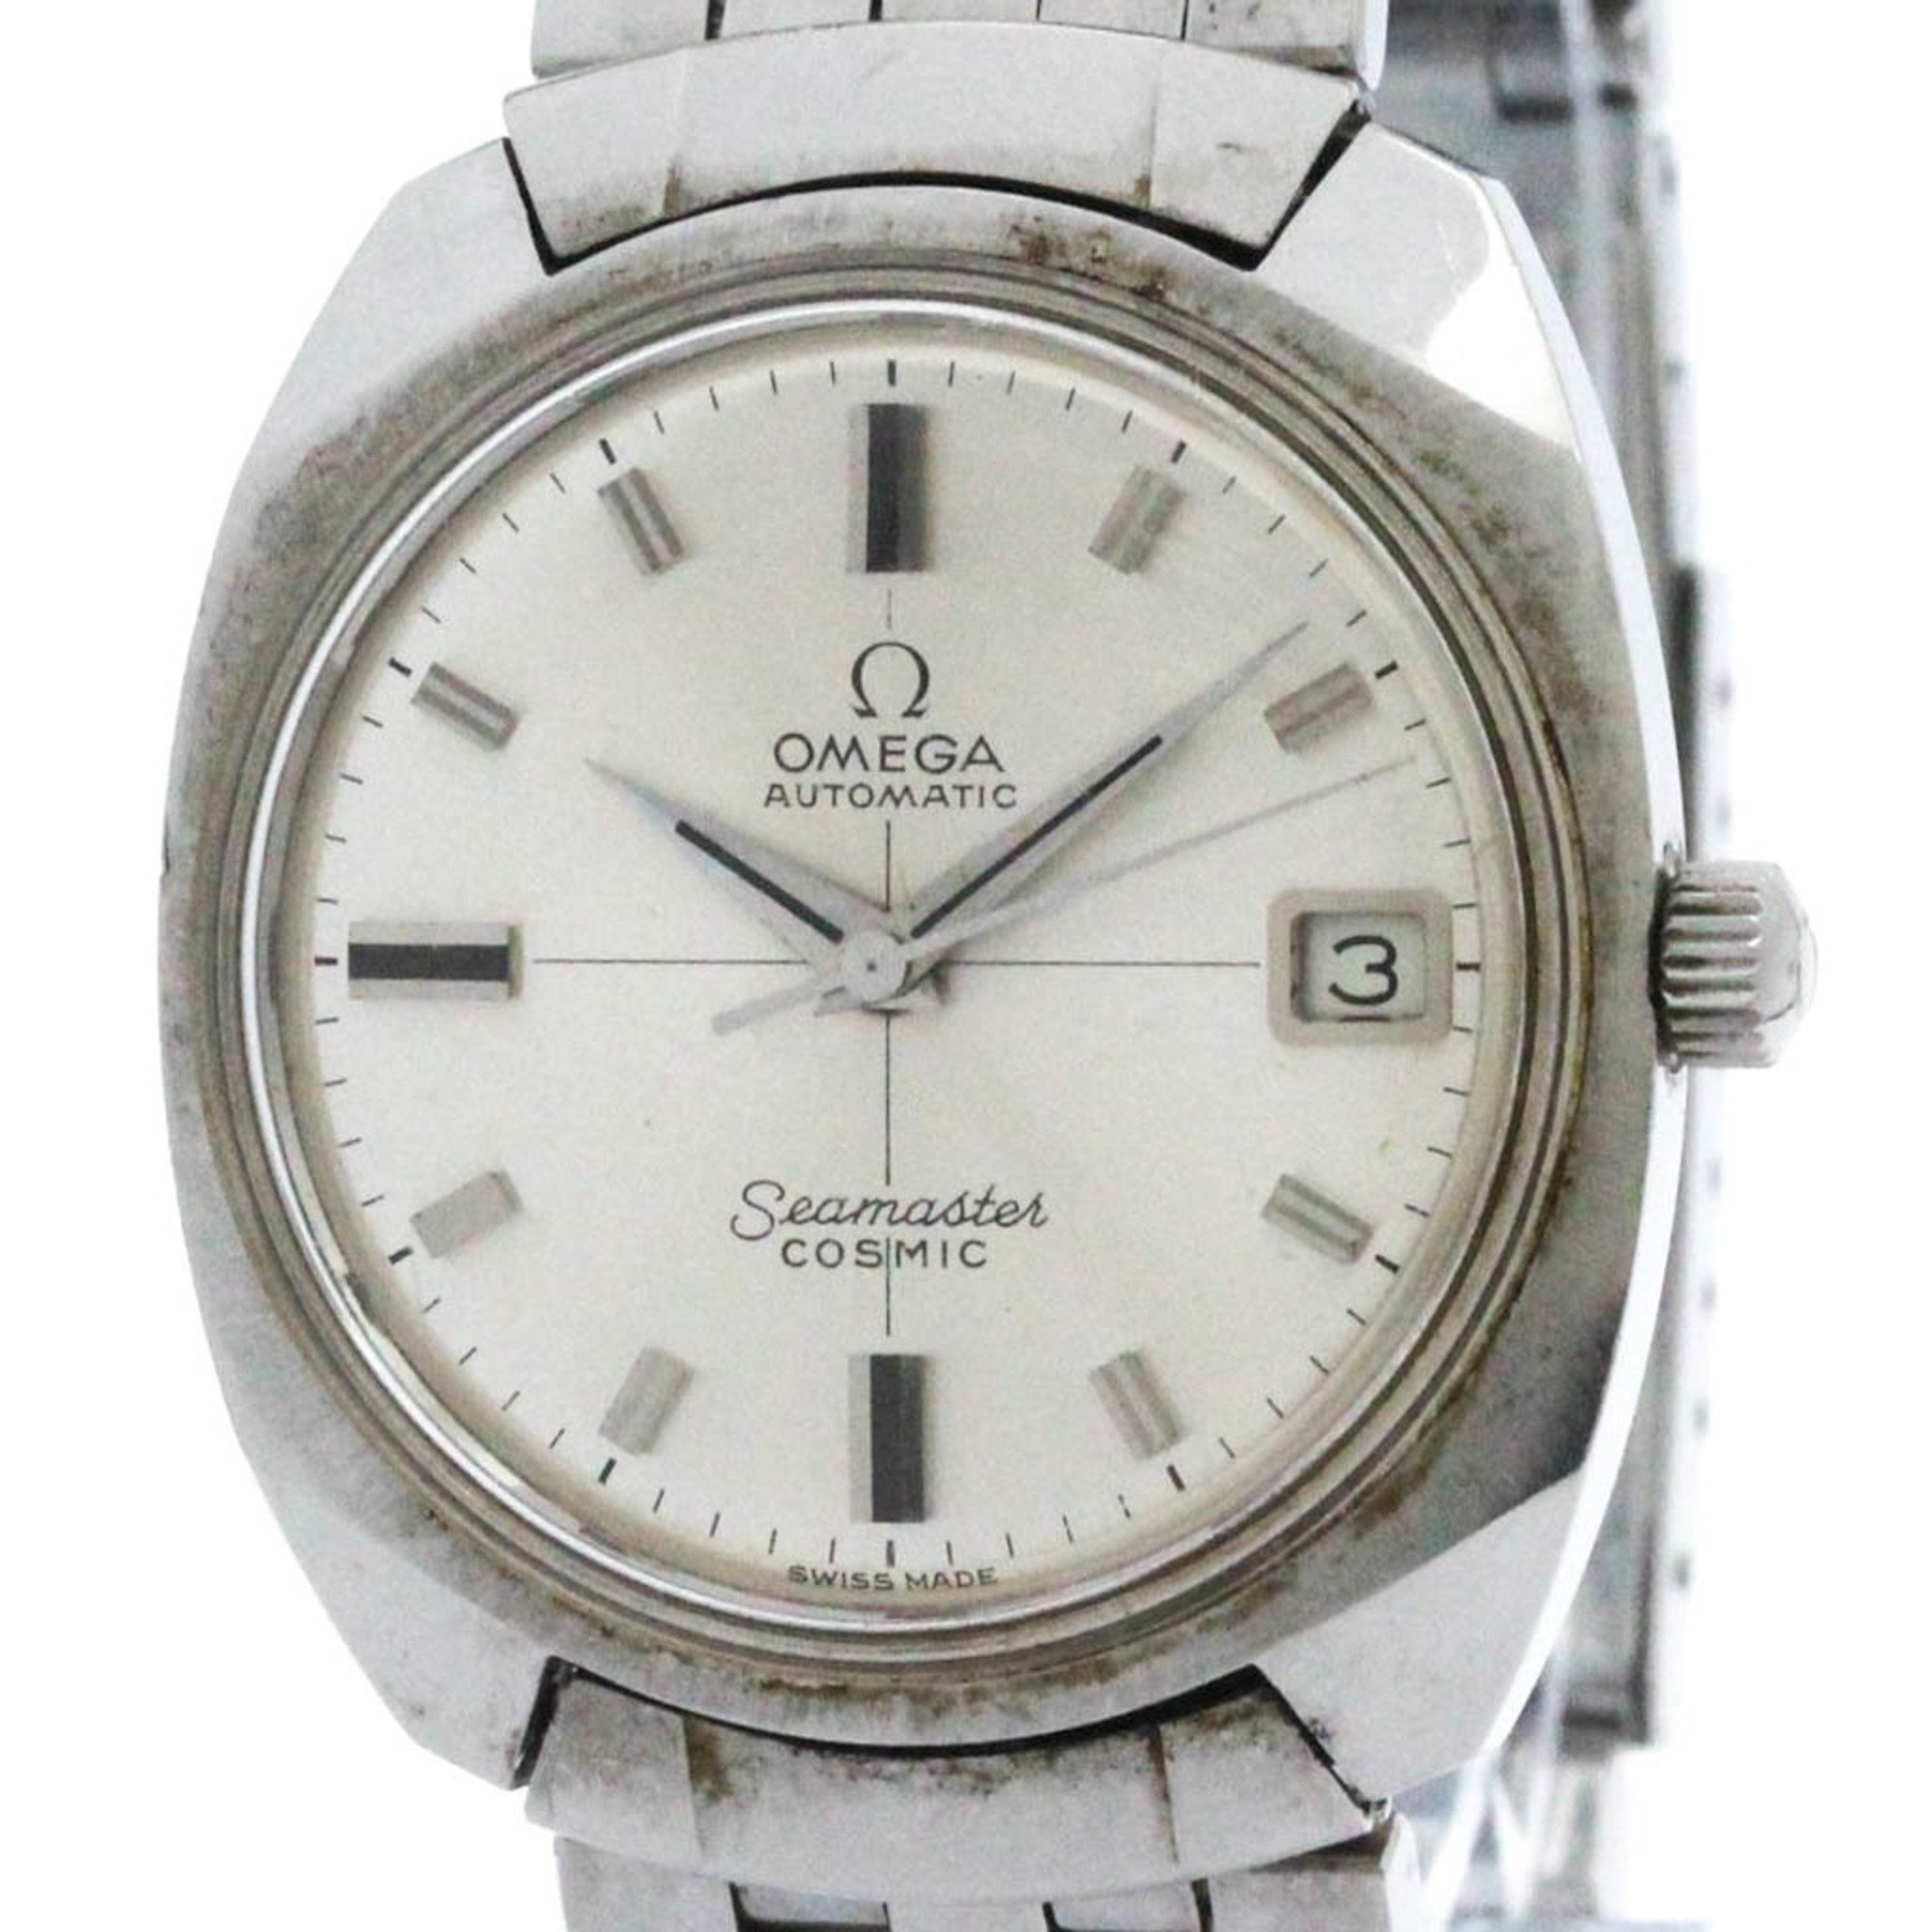 Omega Seamaster Automatic Stainless Steel Men's Dress Watch 166.022